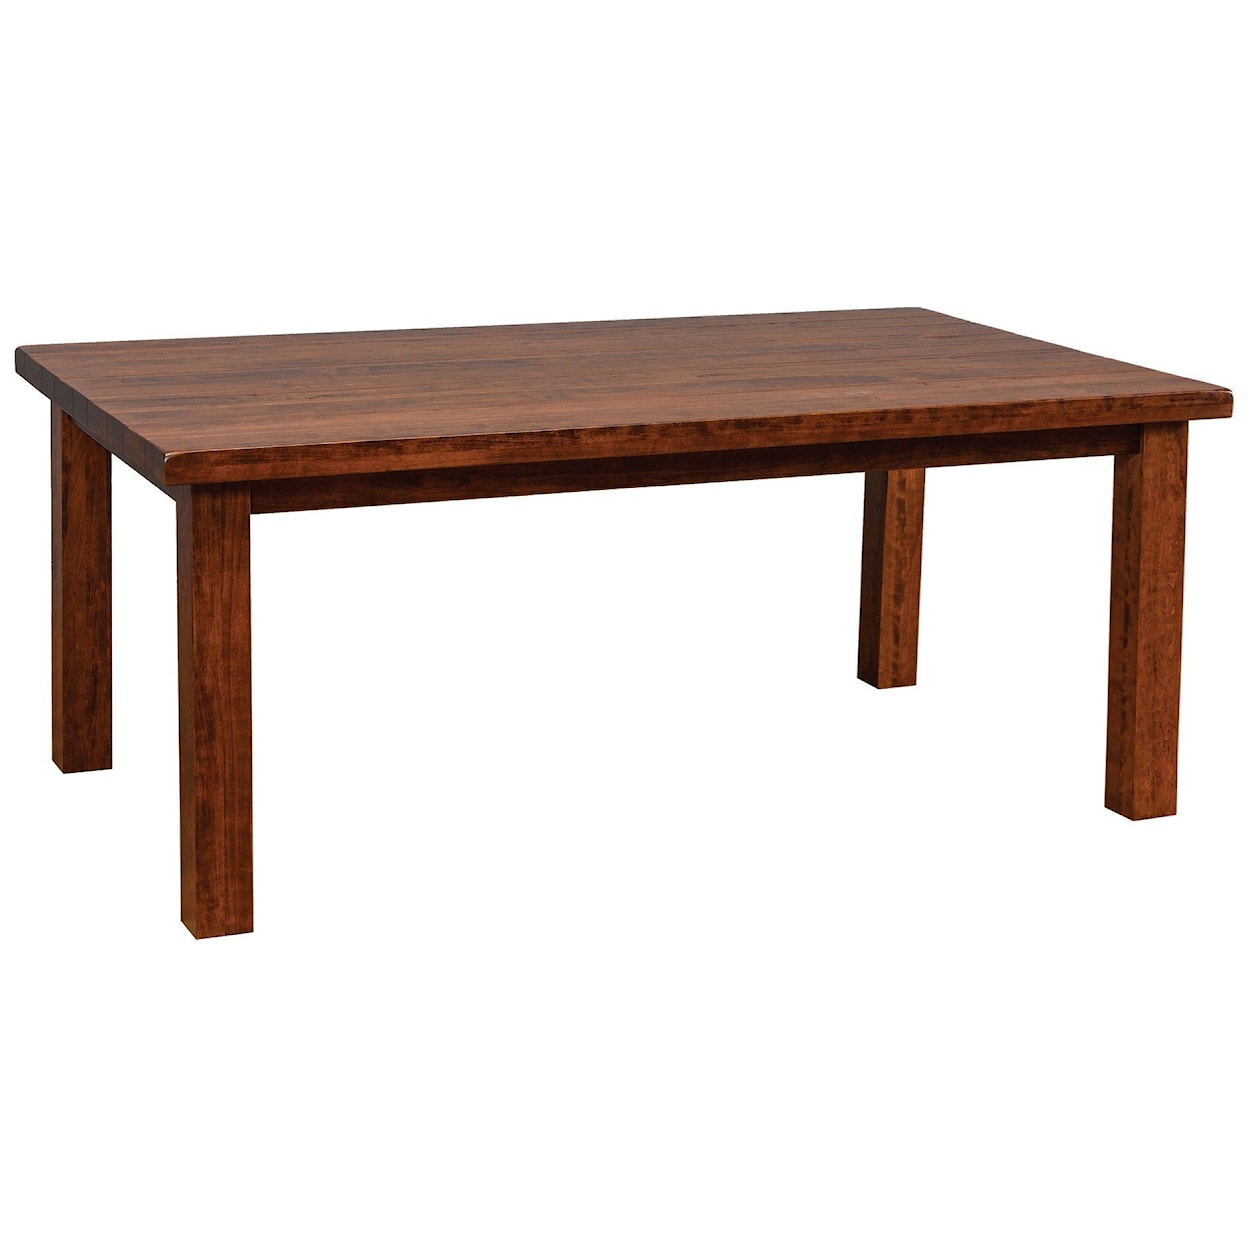 Daniel's Amish Westchester Westchester Dining Table